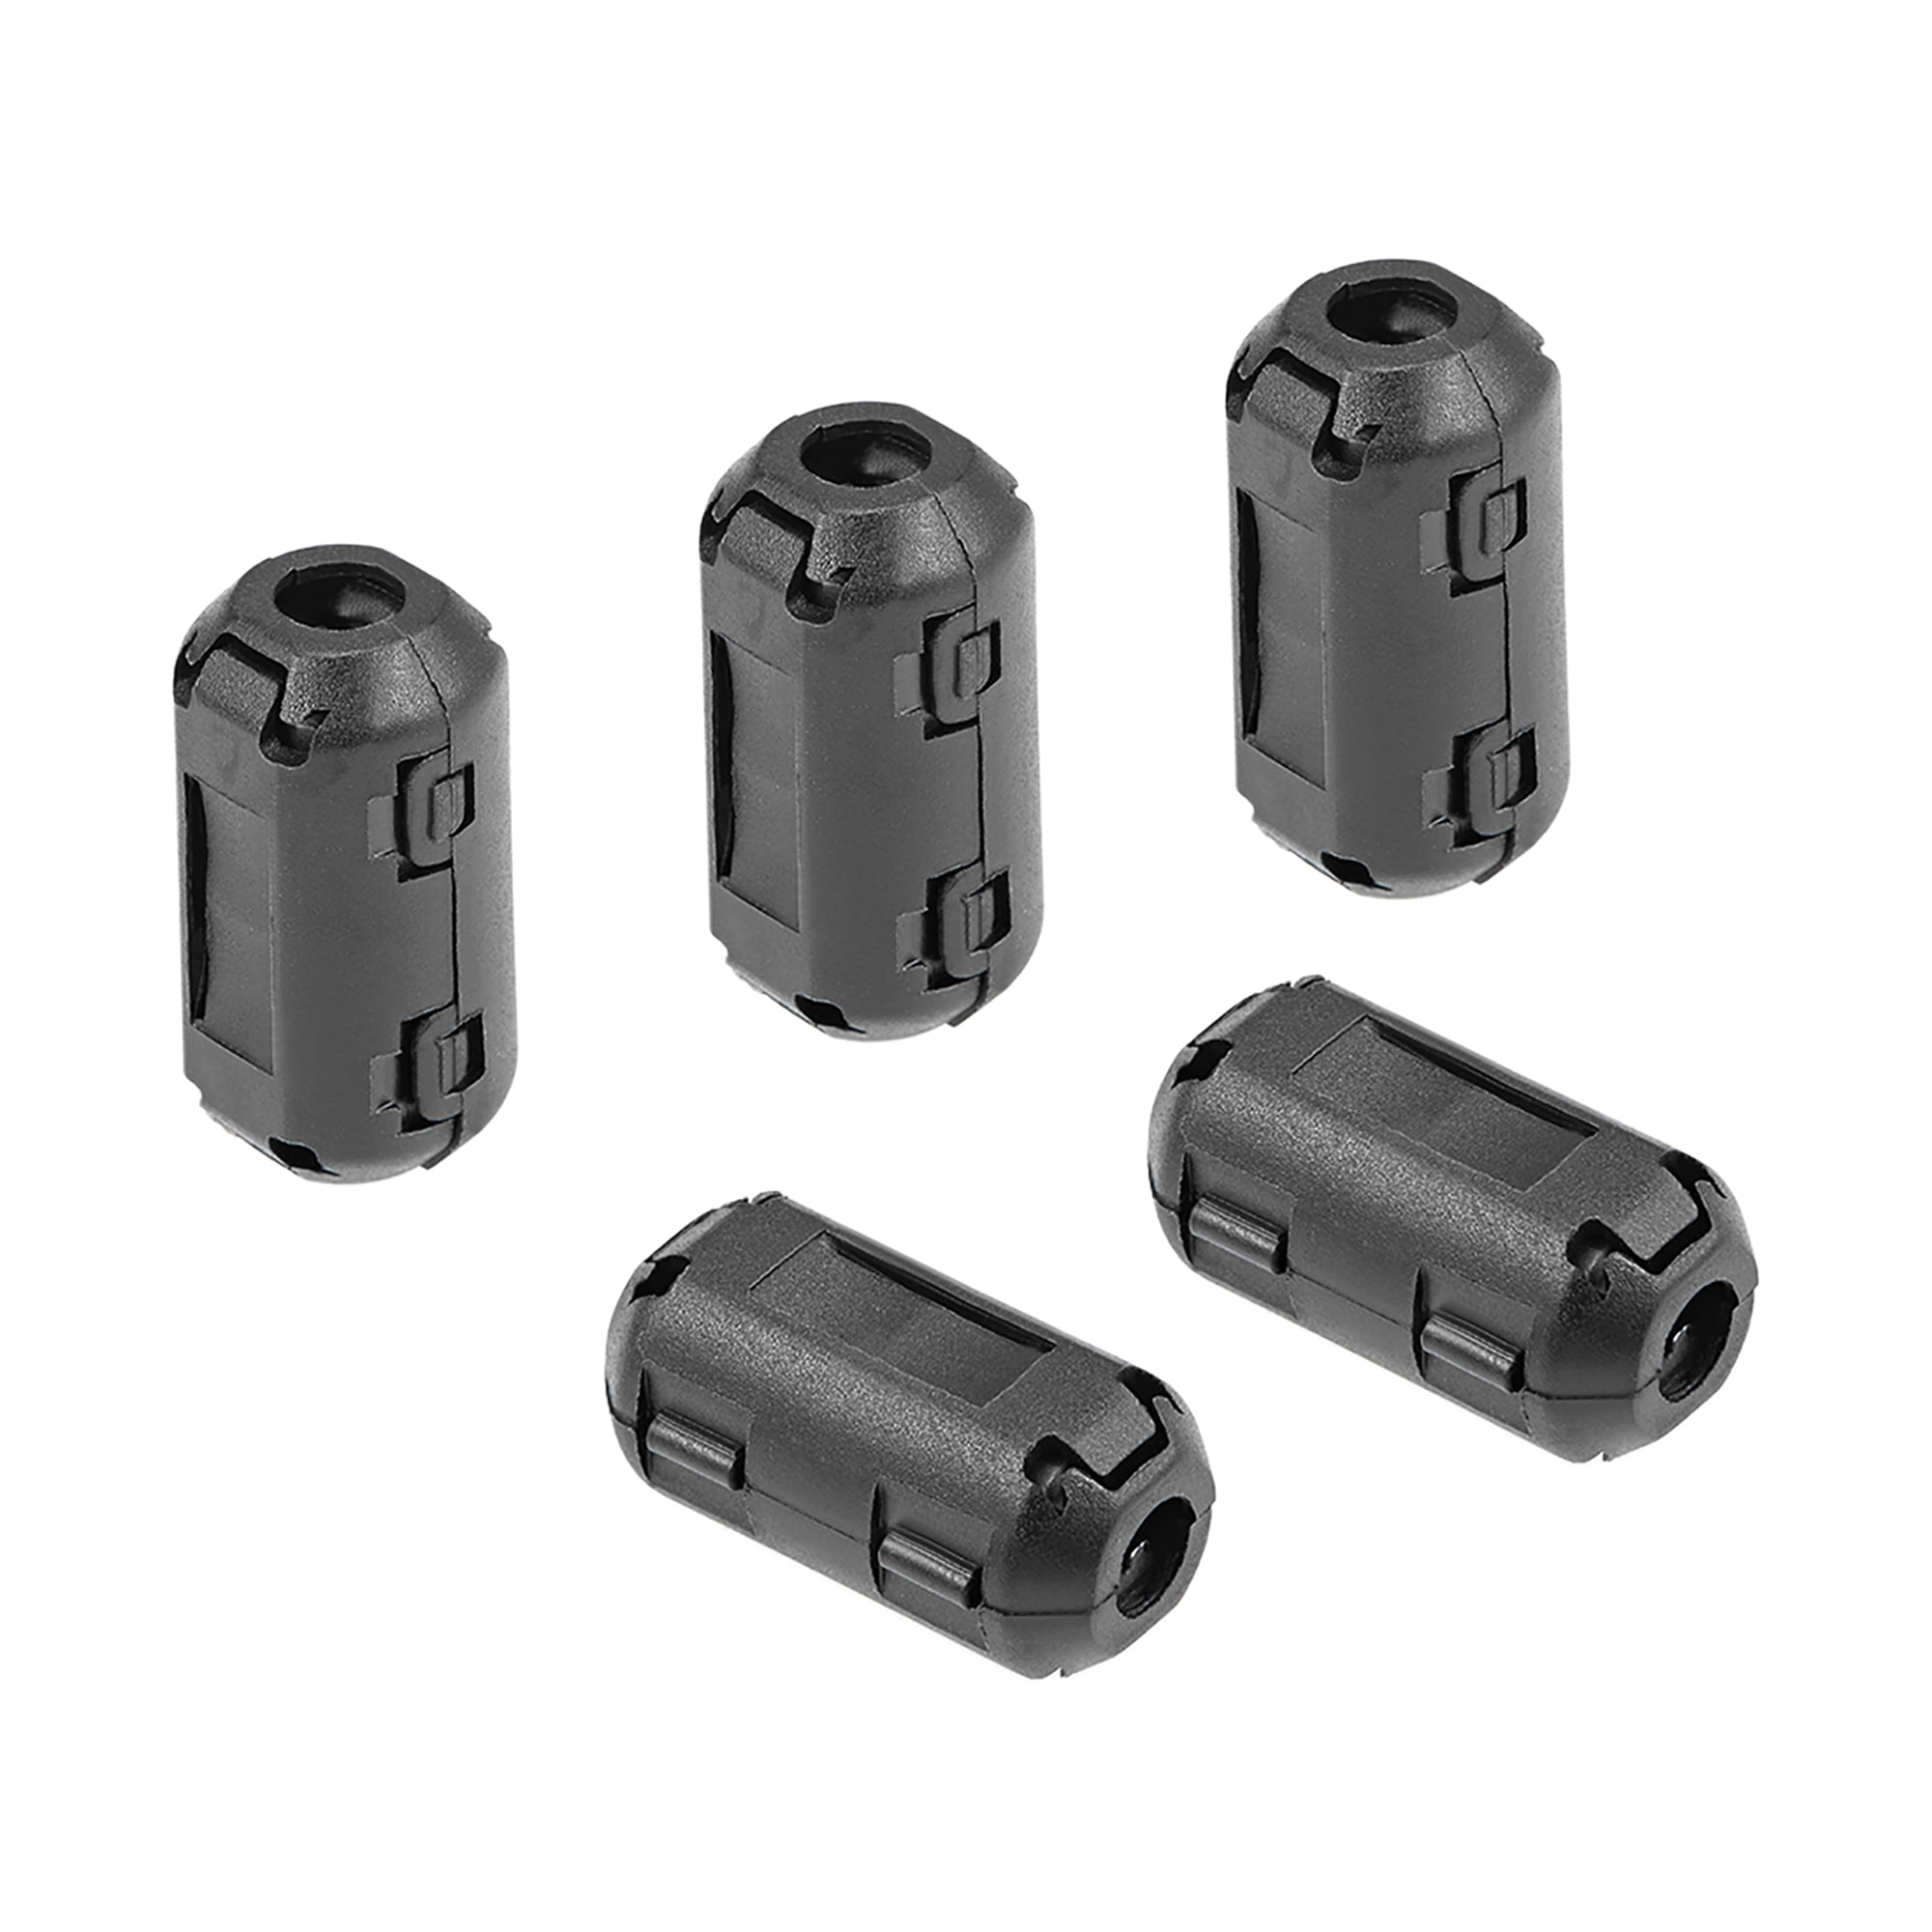 5x Clip On EMI RFI Noise Ferrite Core Filter for 7mm Cable P Ze